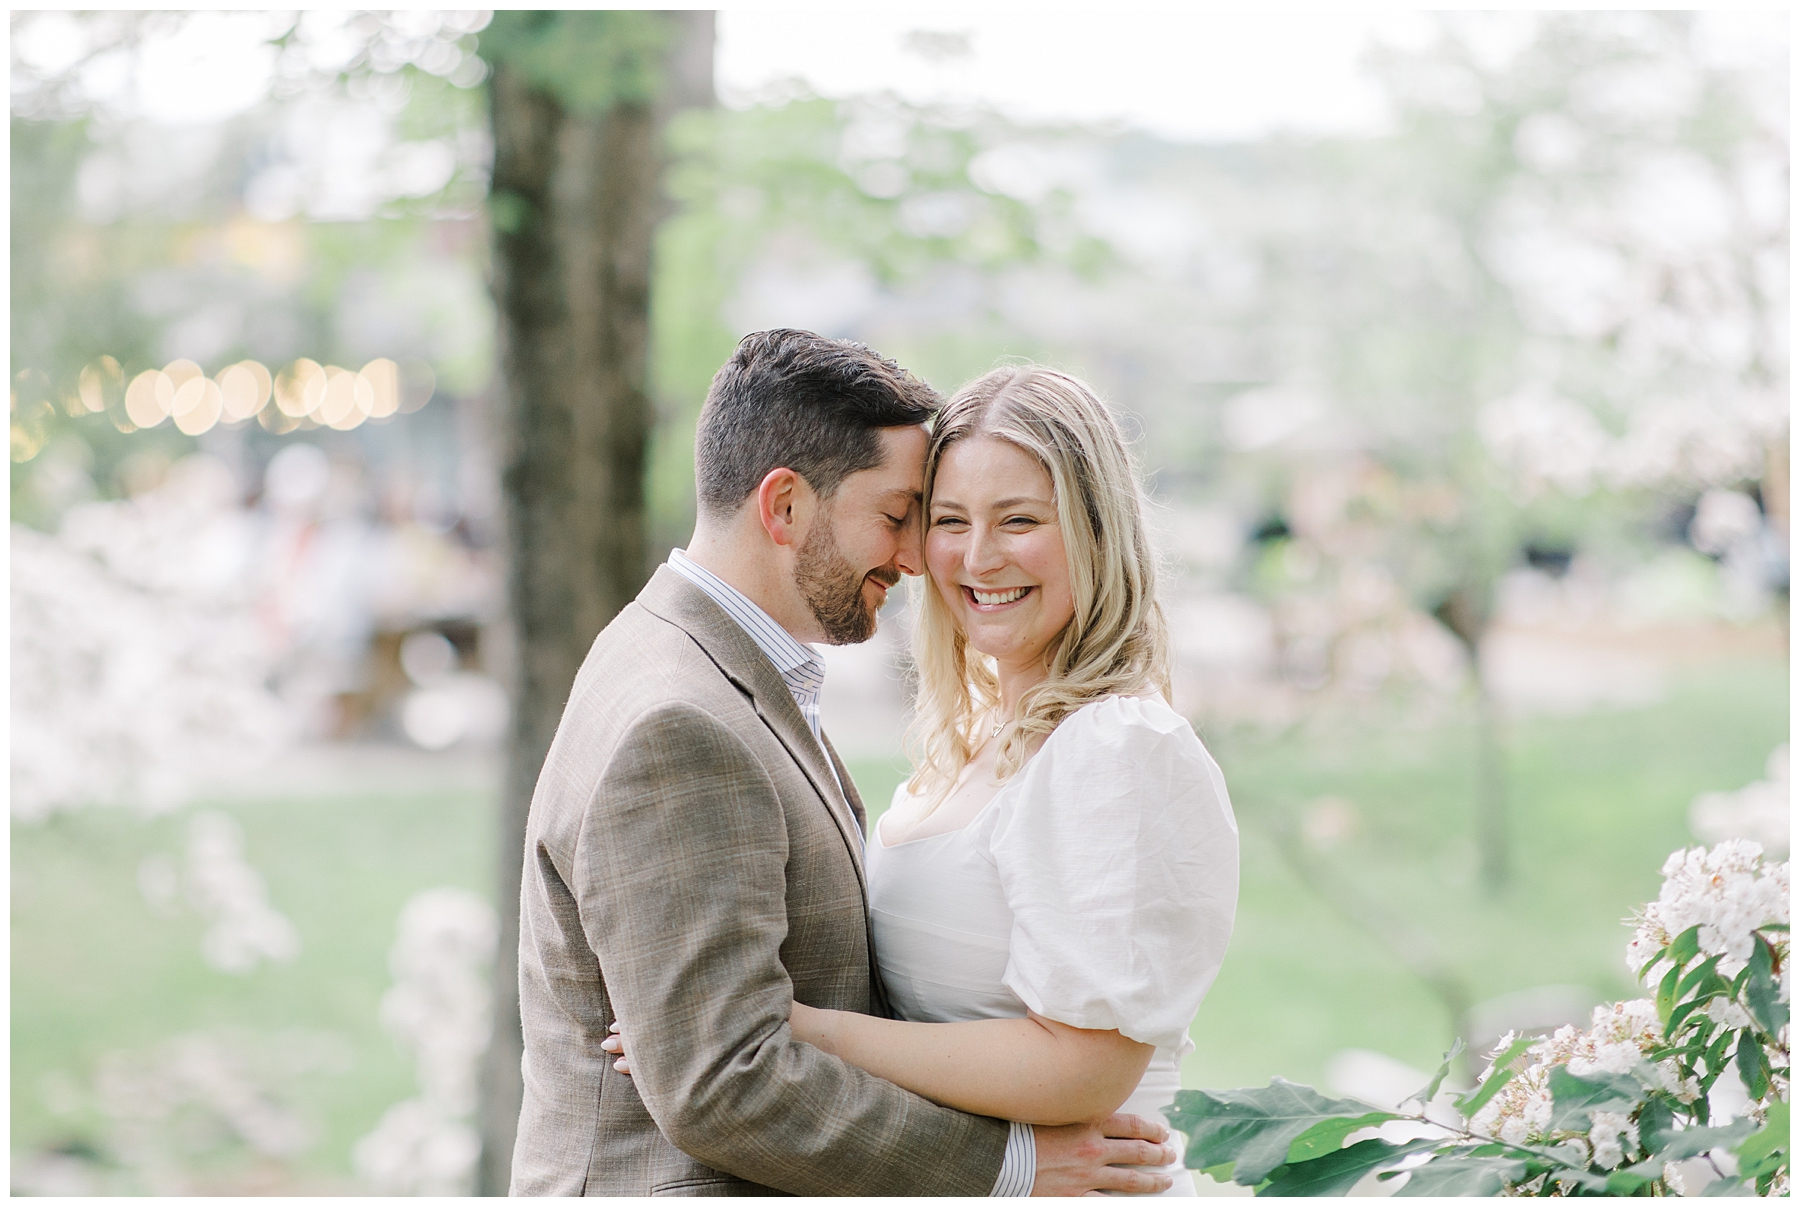 Intimate Engagement Session by Boston Engagement photographer Stephanie Berenson Photography